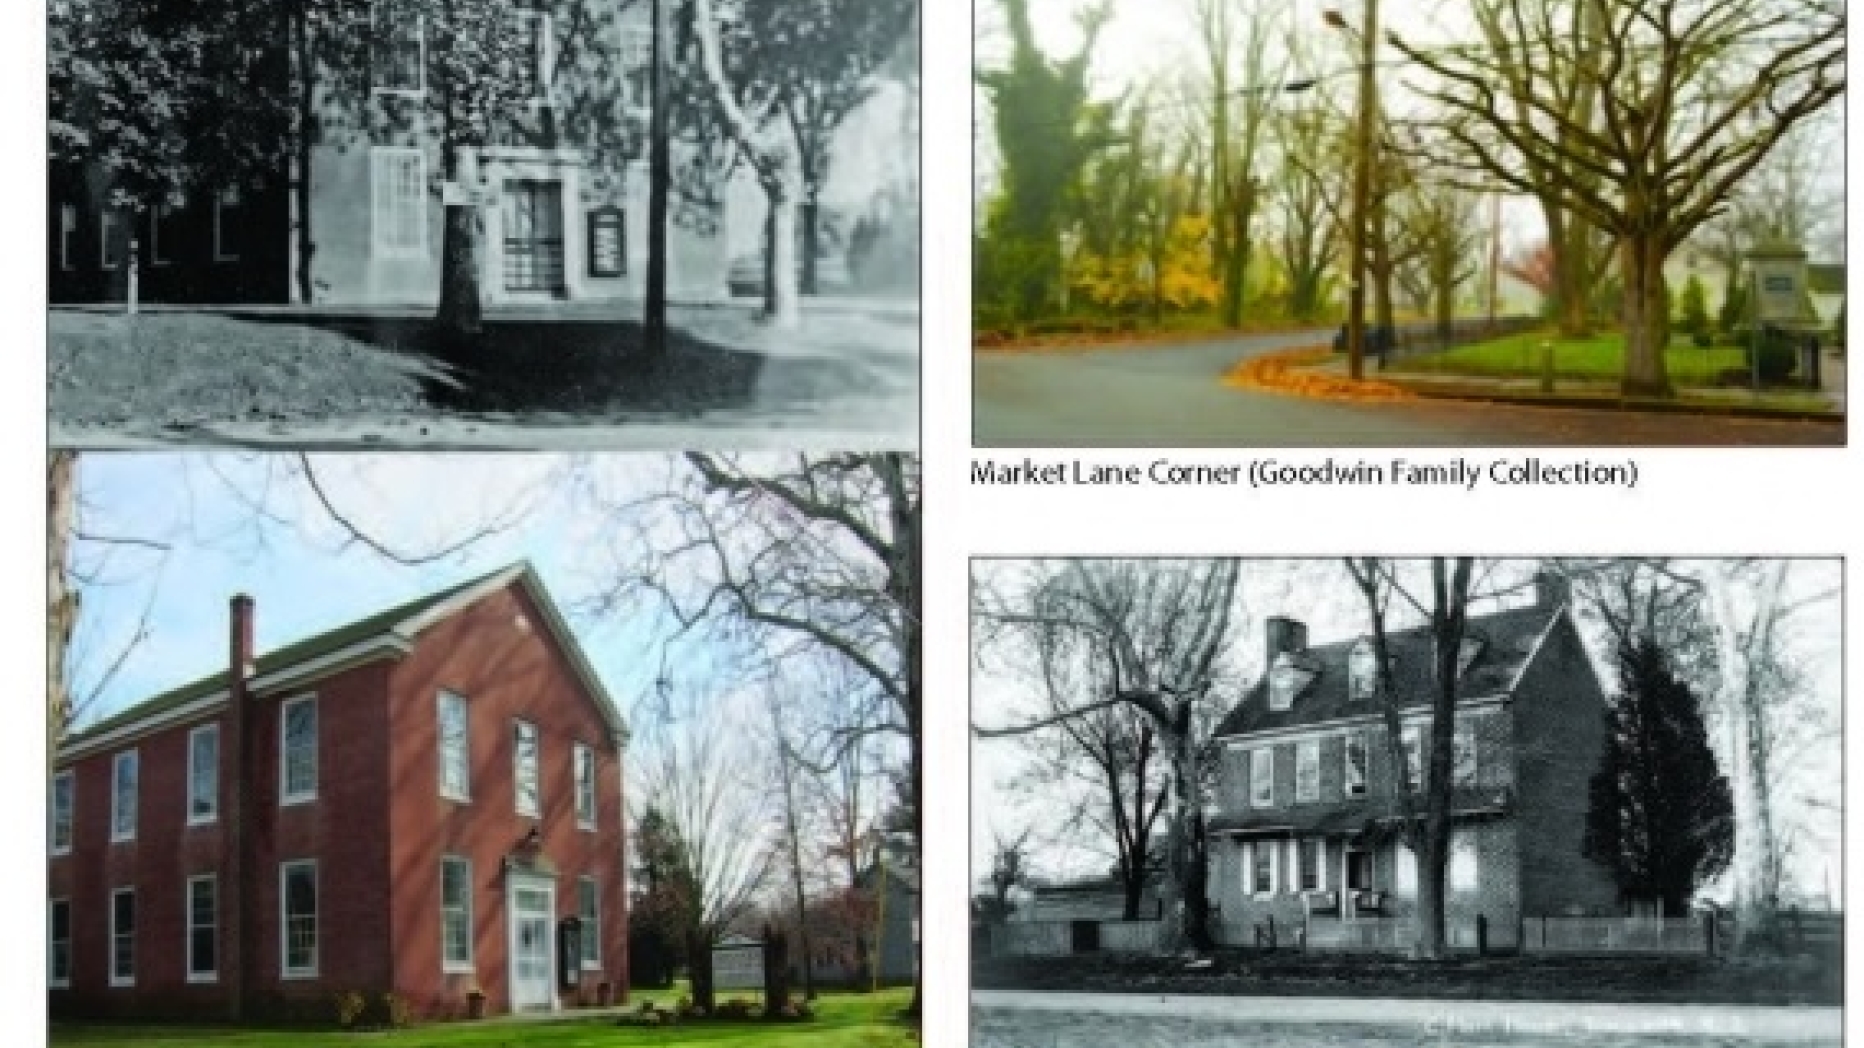 Photographs of a house in different time periods